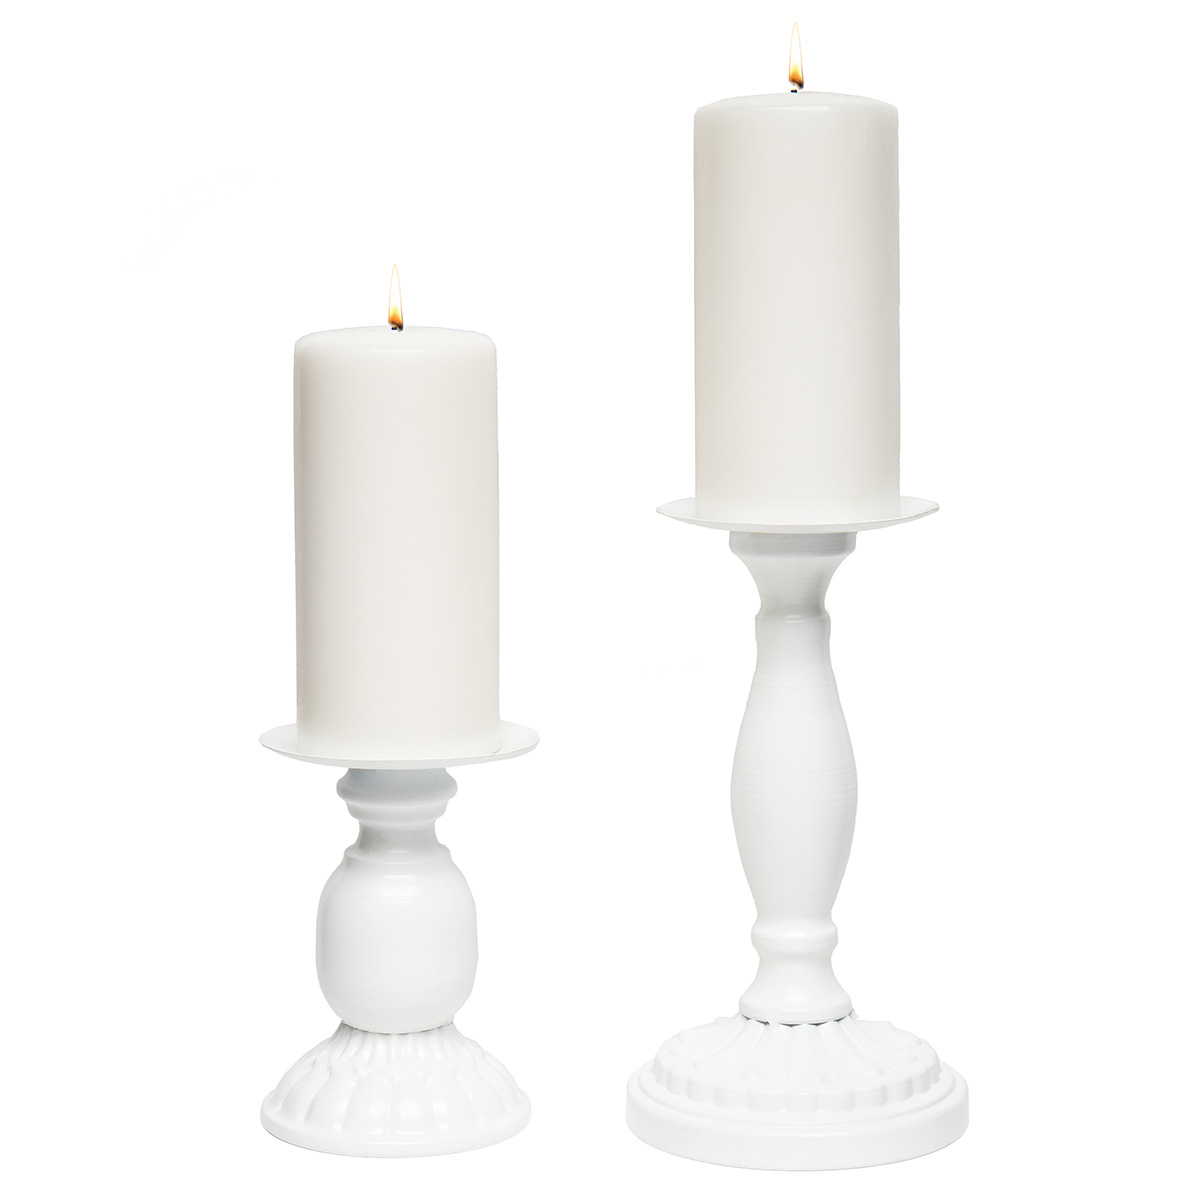 CANDLEHOLDER MEDIUM 4.5IN X 8.5IN MATTE WHITE METAL - Click Image to Close